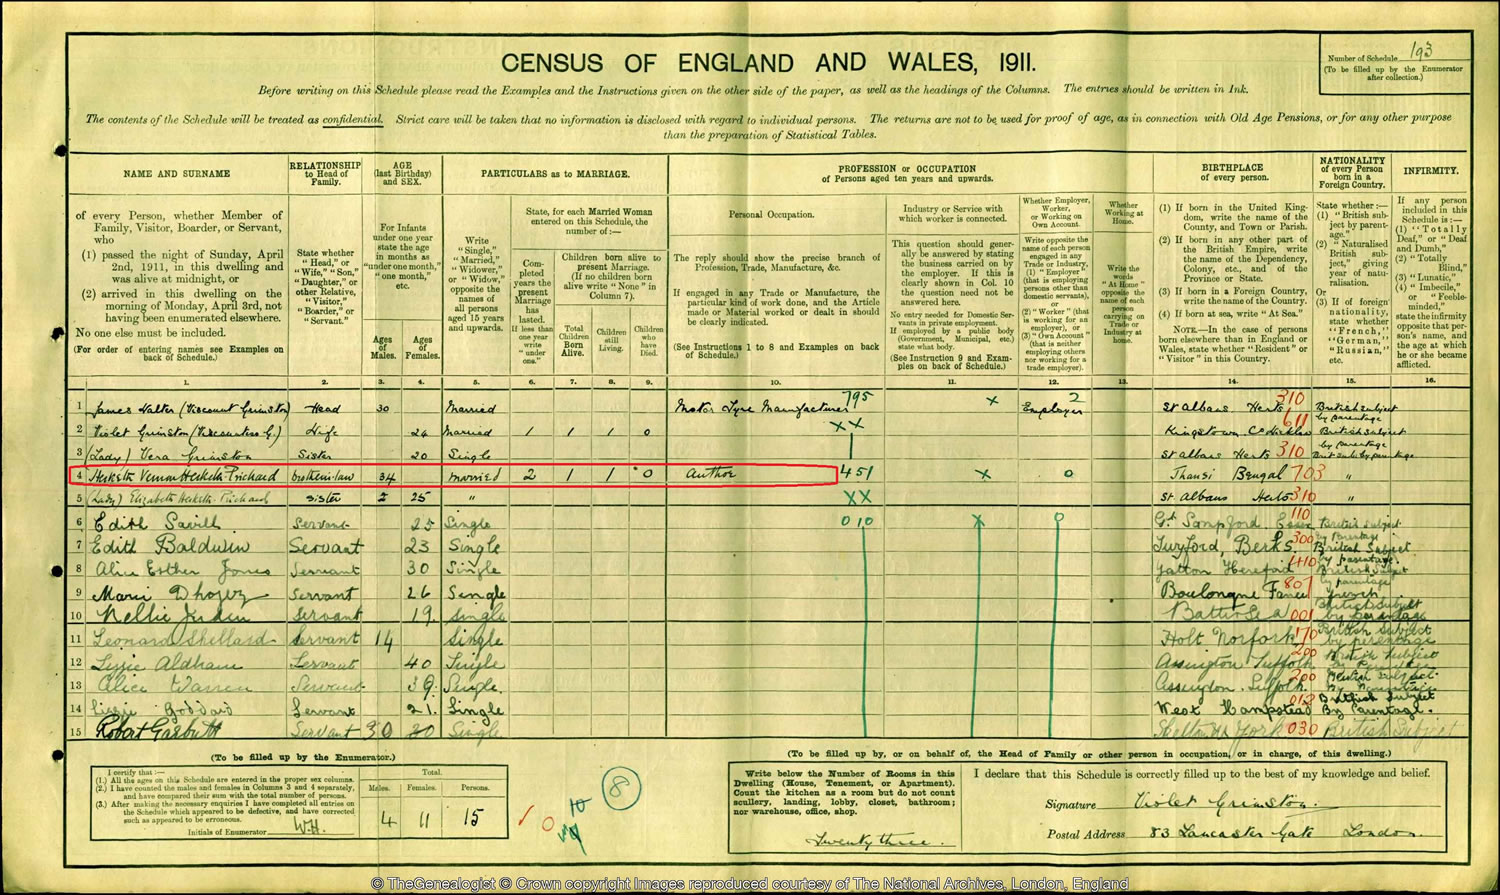 1911 census records Hesketh Prichard as an author